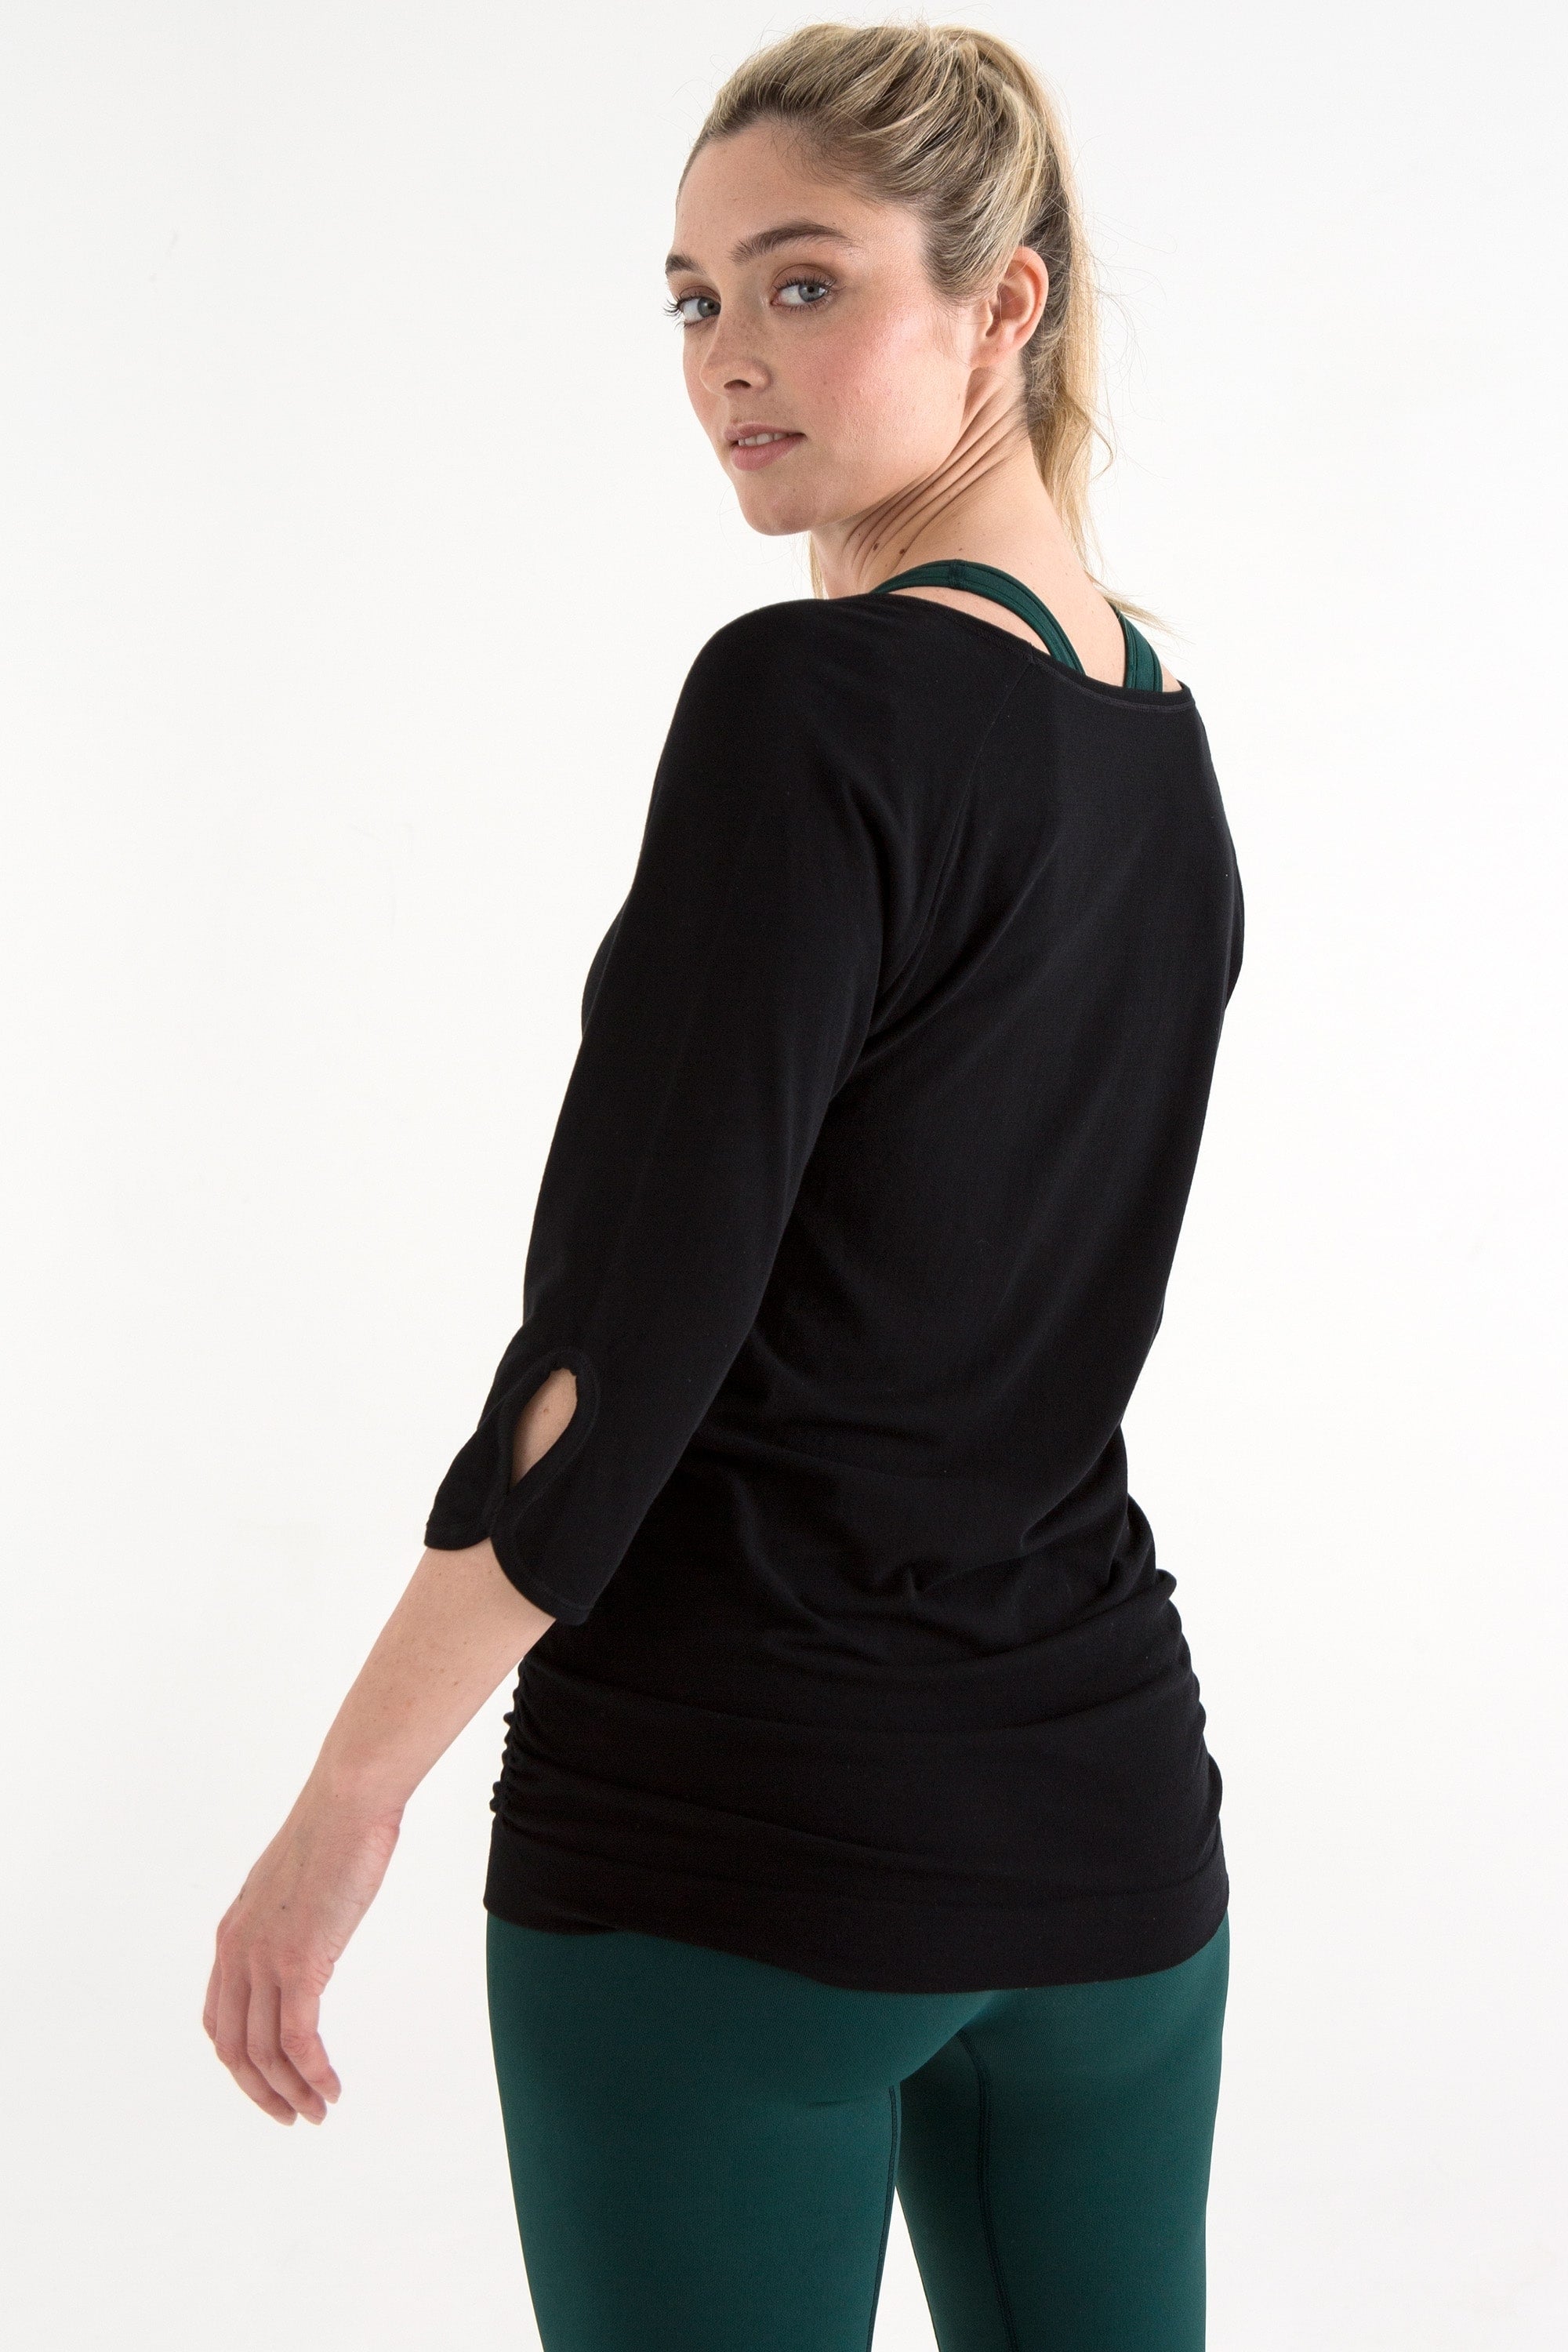 Black bamboo long sleeve top and dark pine green leggings for yoga, pilates, barre and running from sustainable activewear brand, Jilla Active